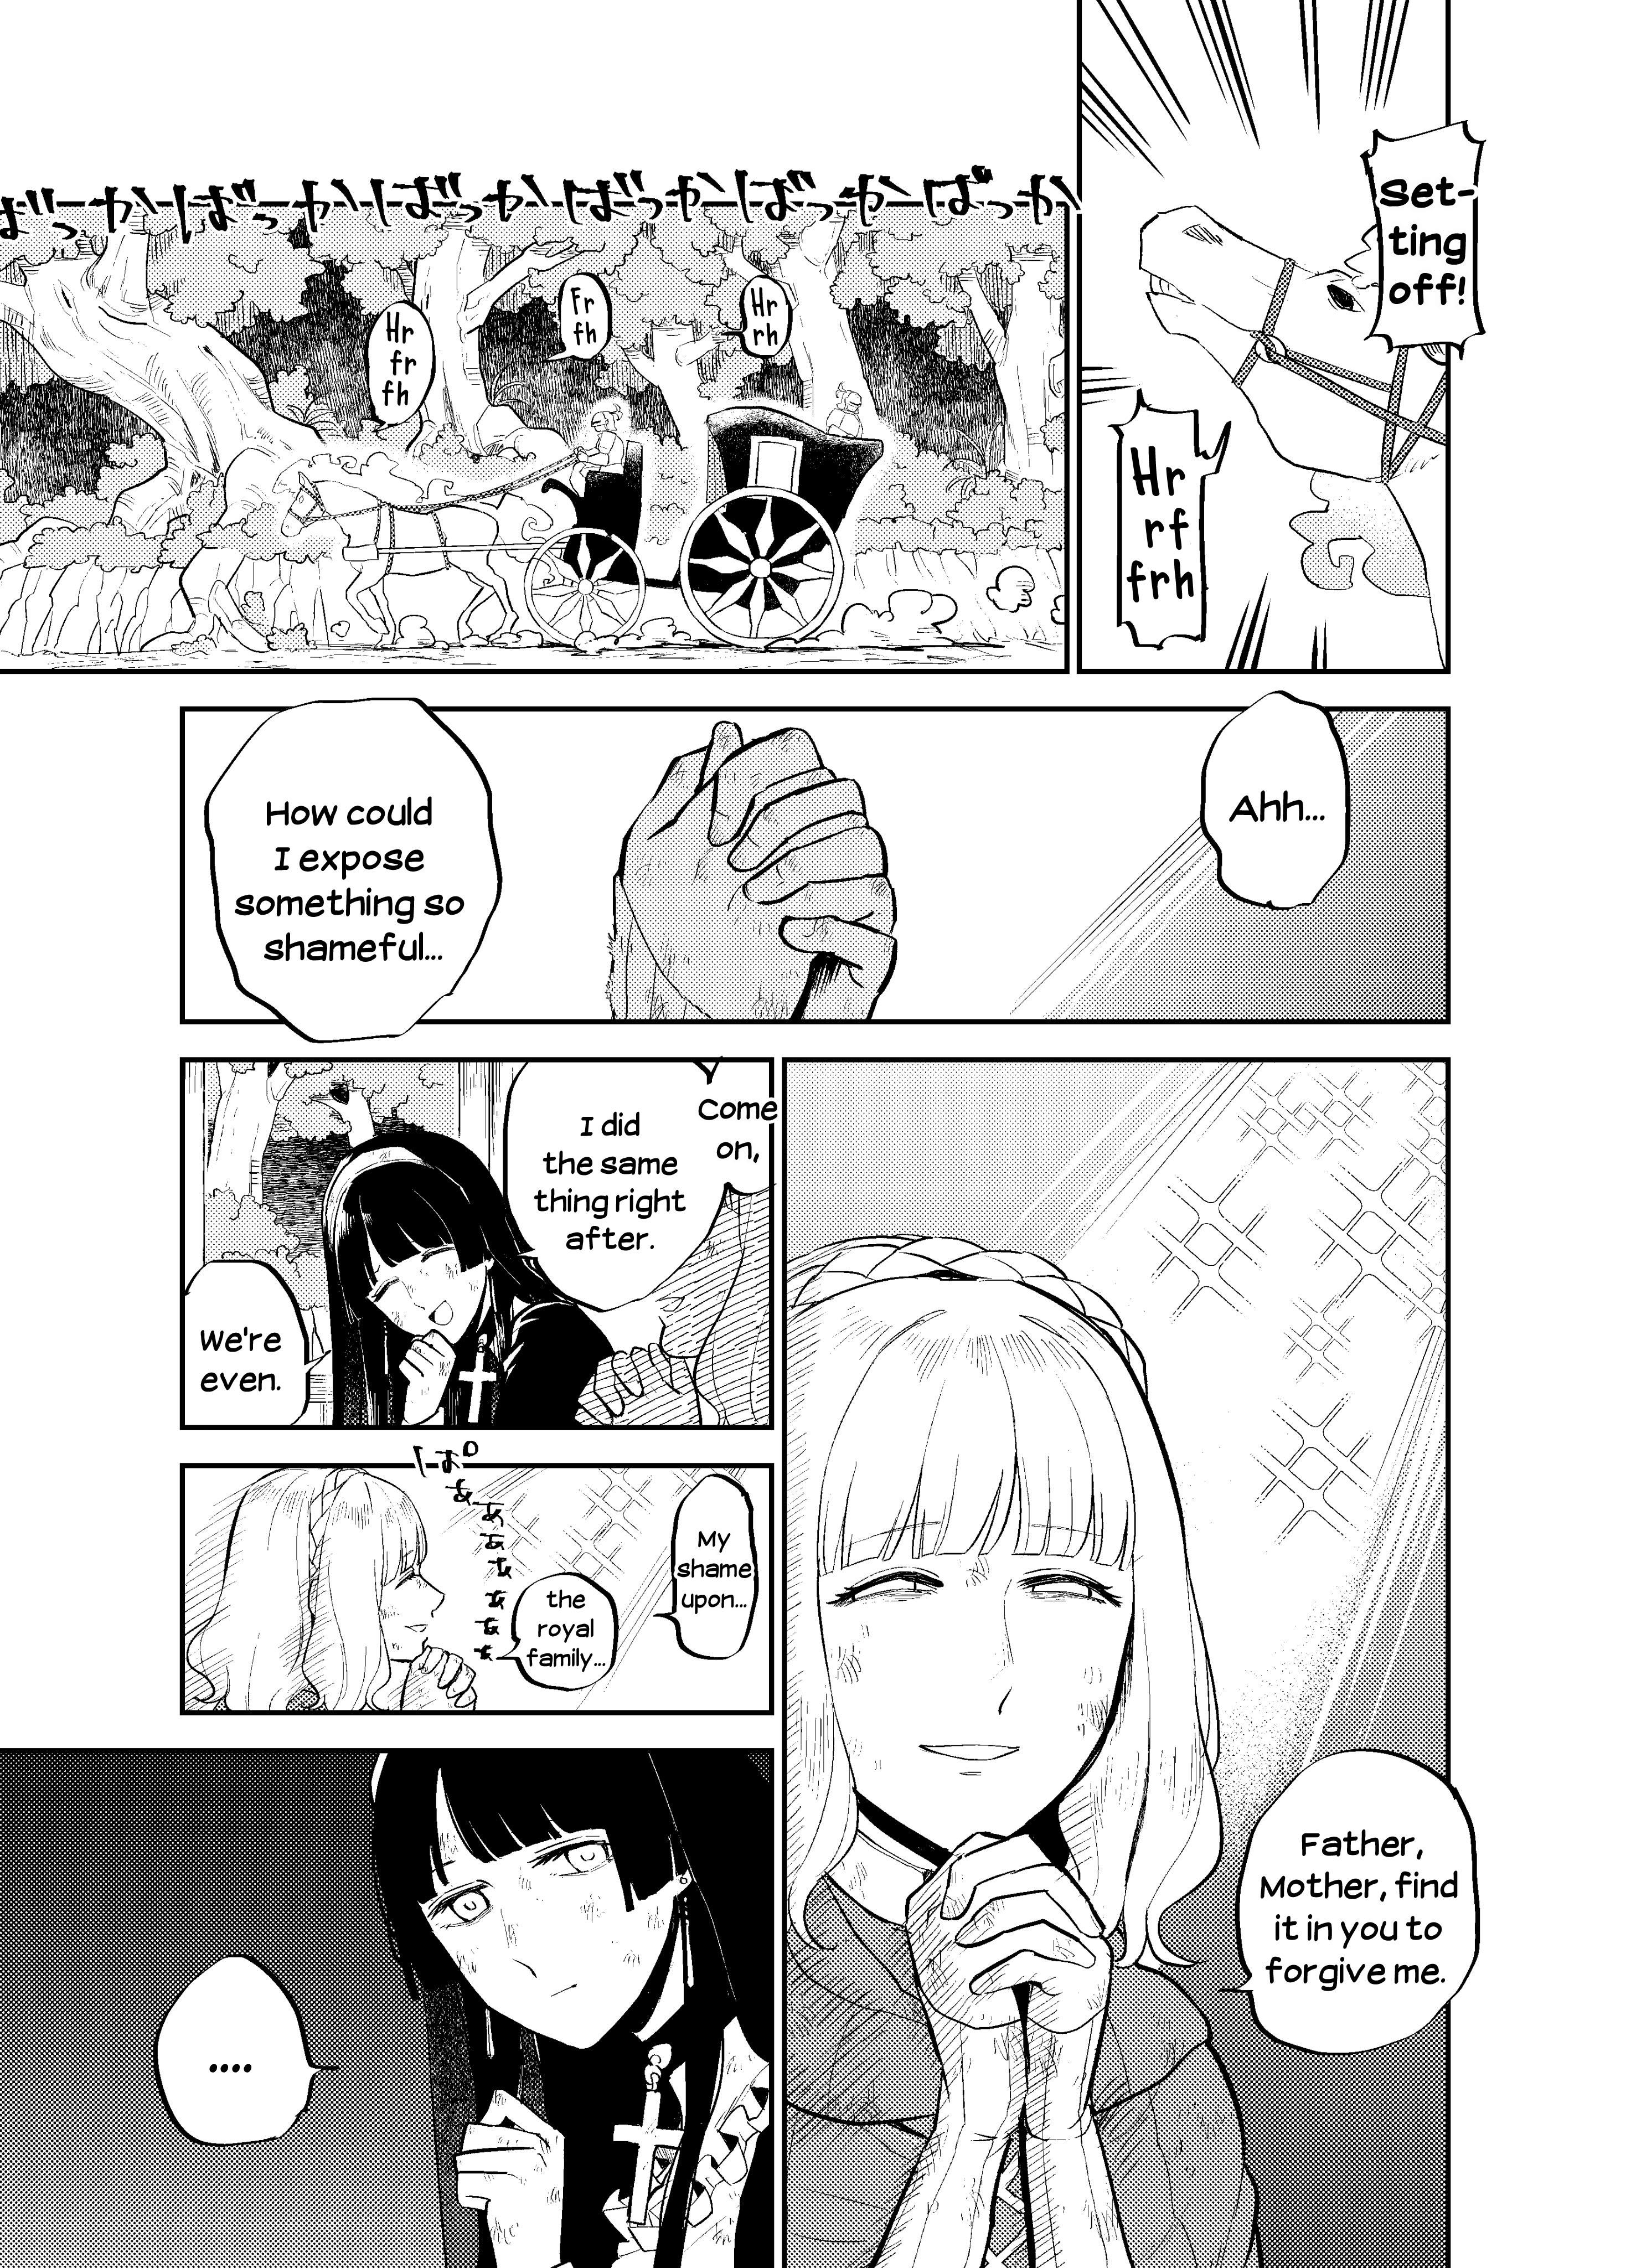 The Princess Of Sylph (Twitter Version) - Page 1